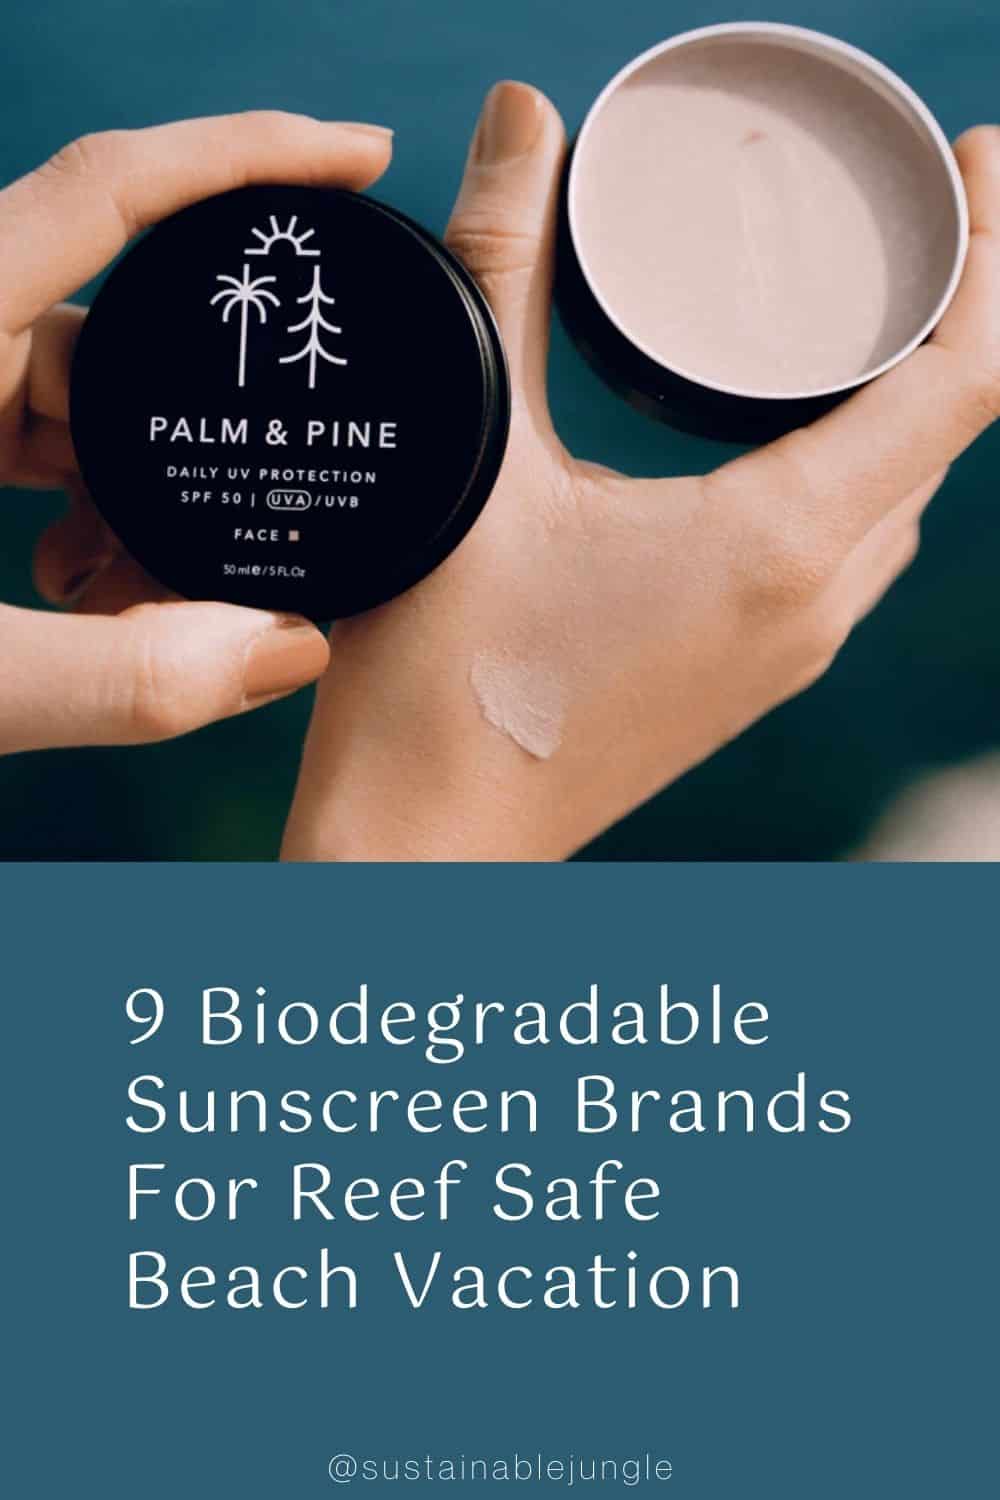 9 Biodegradable Sunscreen Brands For Reef Safe Beach Vacation Image by Palm & Pine #biodegradablesunscreen #reefsafebiodegradablesunscreen #reefsafesunscreen #biodegradablesunscreenbrands #bestbiodegradablesunscreens #reefsafesunscreenbrands #sustainablejungle